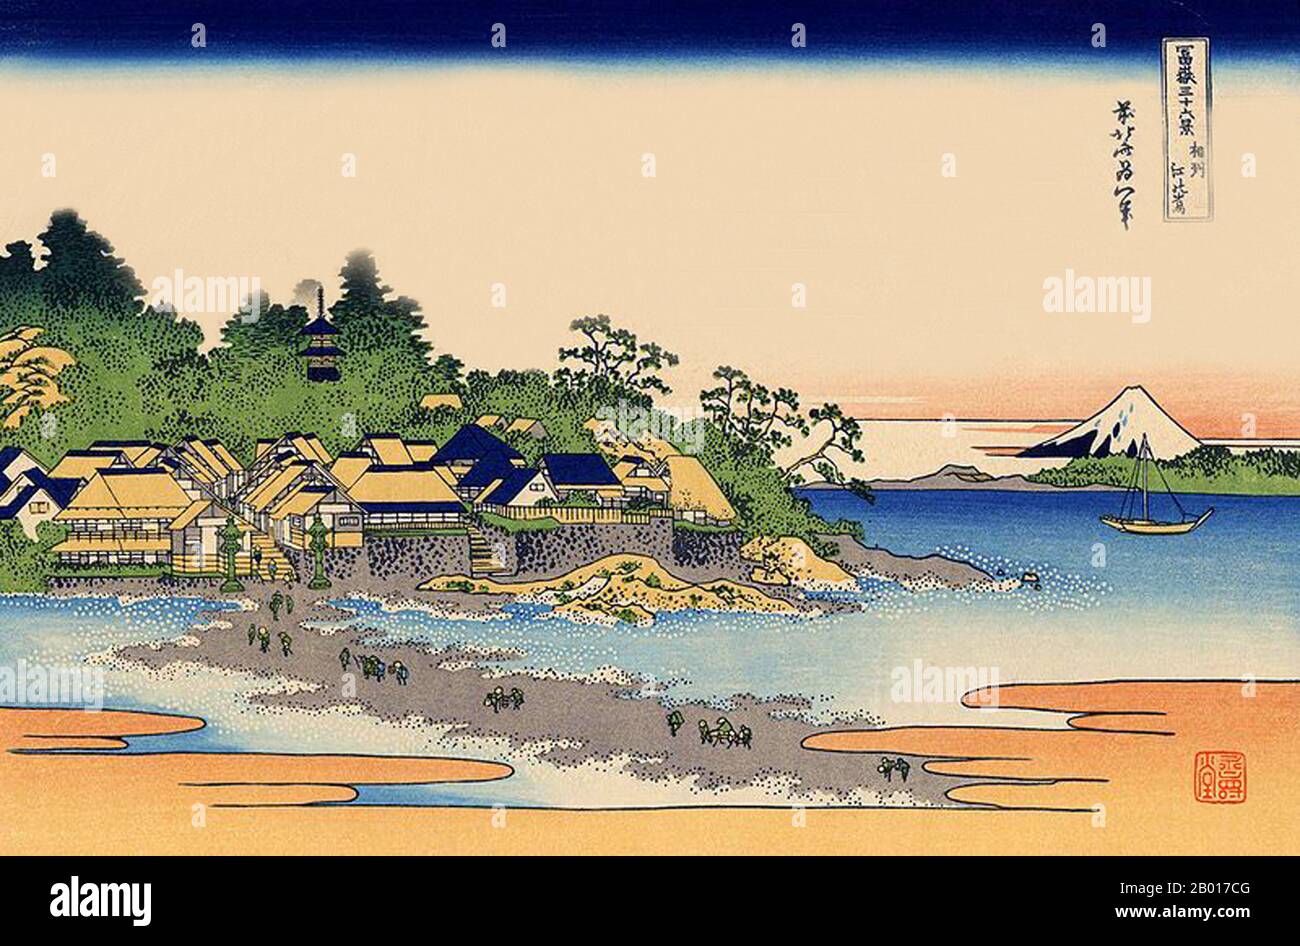 Japan: 'Enoshima in Sagami Bay'. Ukiyo-e woodblock print from the series ‘Thirty-Six Views of Mount Fuji’ by Katsushika Hokusai (31 October 1760 - 10 May 1849), 1830.  ‘Thirty-six Views of Mount Fuji’ is an ‘ukiyo-e’ series of woodcut prints by Japanese artist Katsushika Hokusai. The series depicts Mount Fuji in differing seasons and weather conditions from a variety of places and distances. It actually consists of 46 prints created between 1826 and 1833. The first 36 were included in the original publication and, due to their popularity, 10 more were added after the original publication. Stock Photo